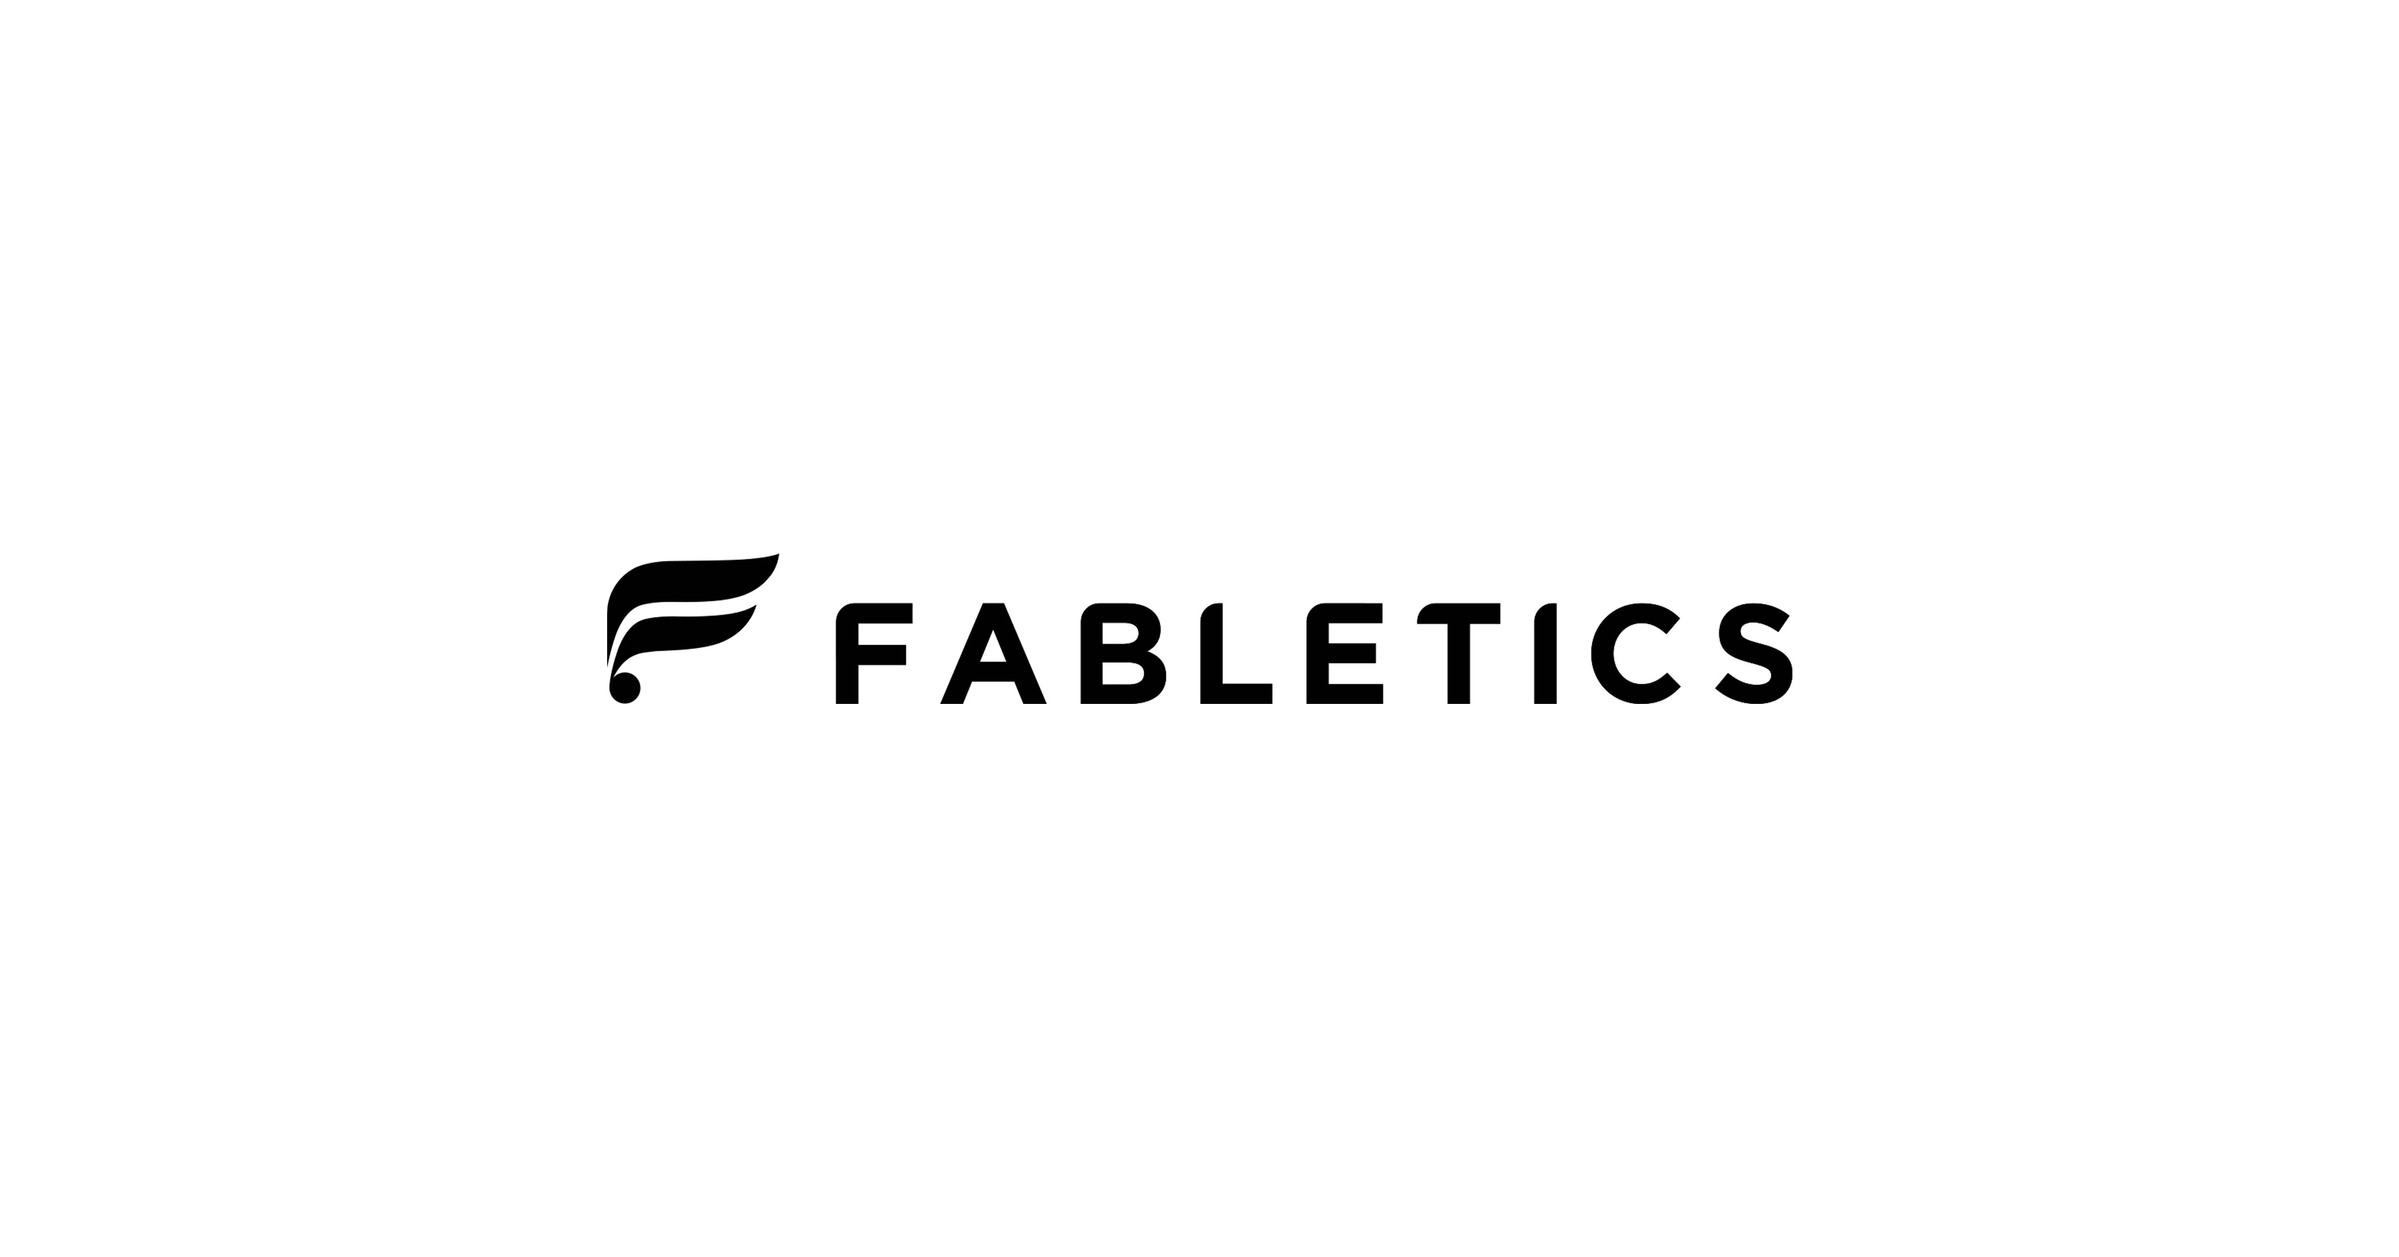 Fabletics Announces The Demi Lovato For Fabletics Collaboration In Support  Of The Brand's Partnership With Girl Up